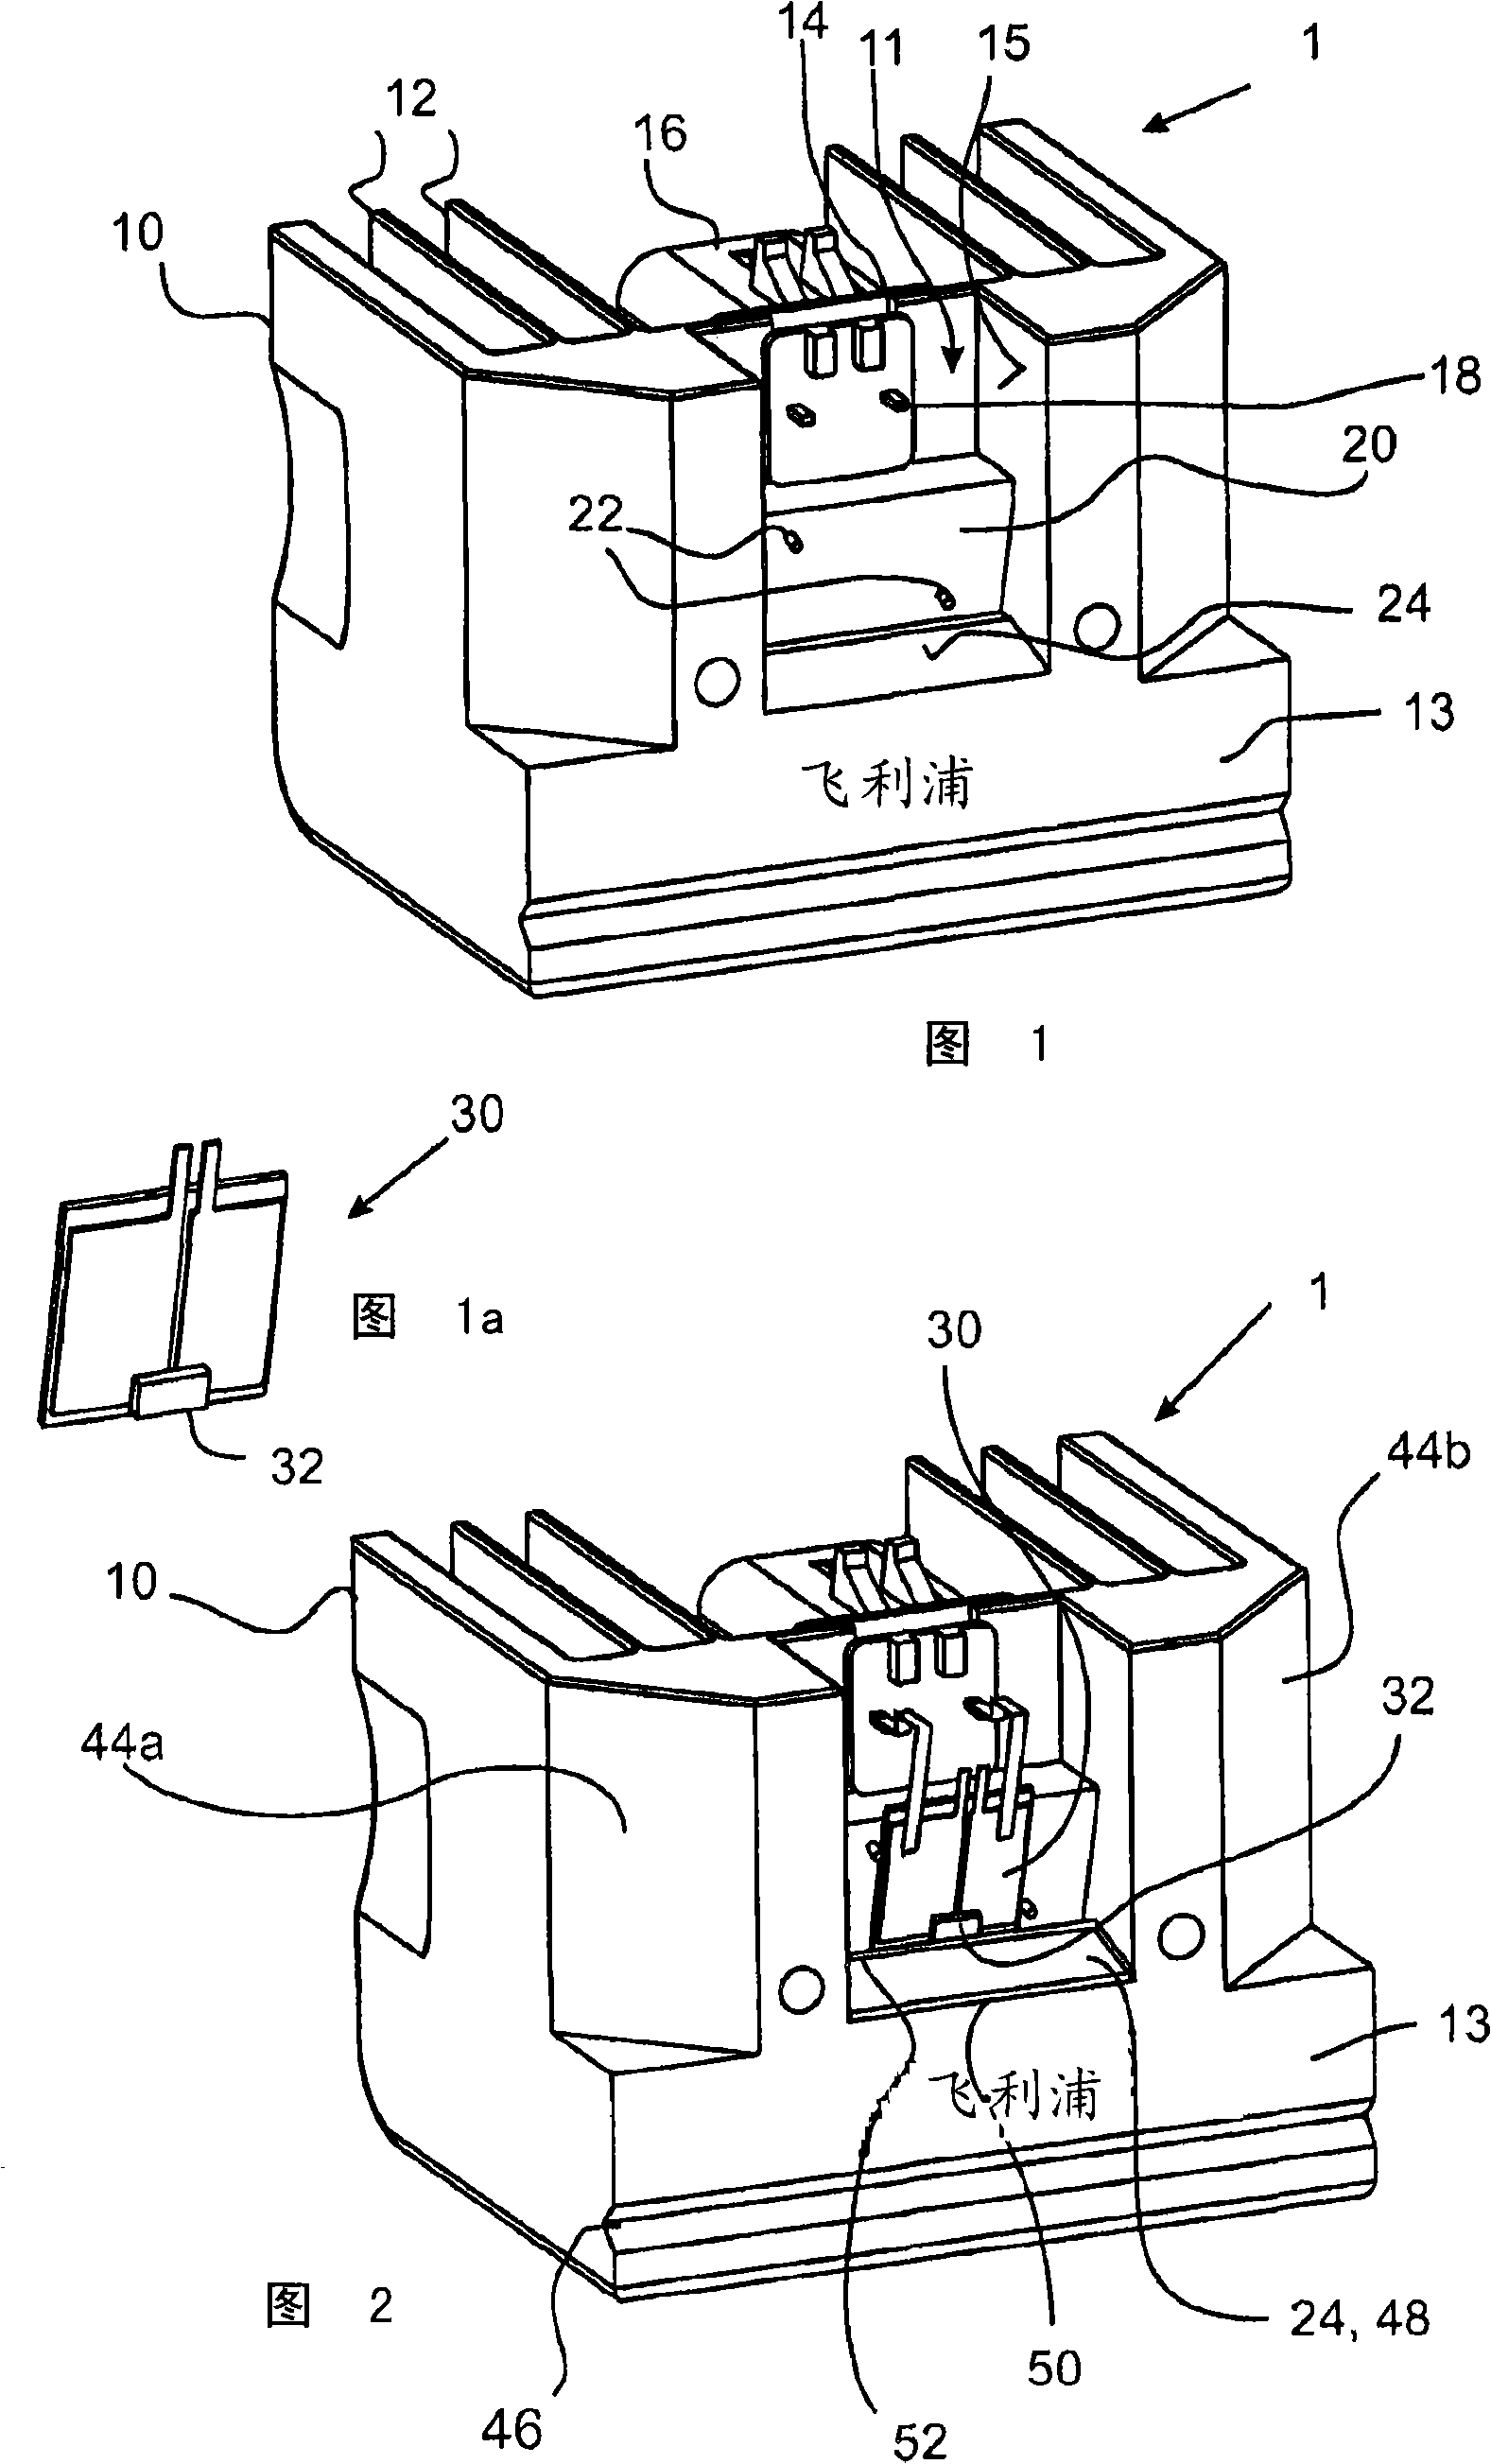 Lighting device and method for directing light